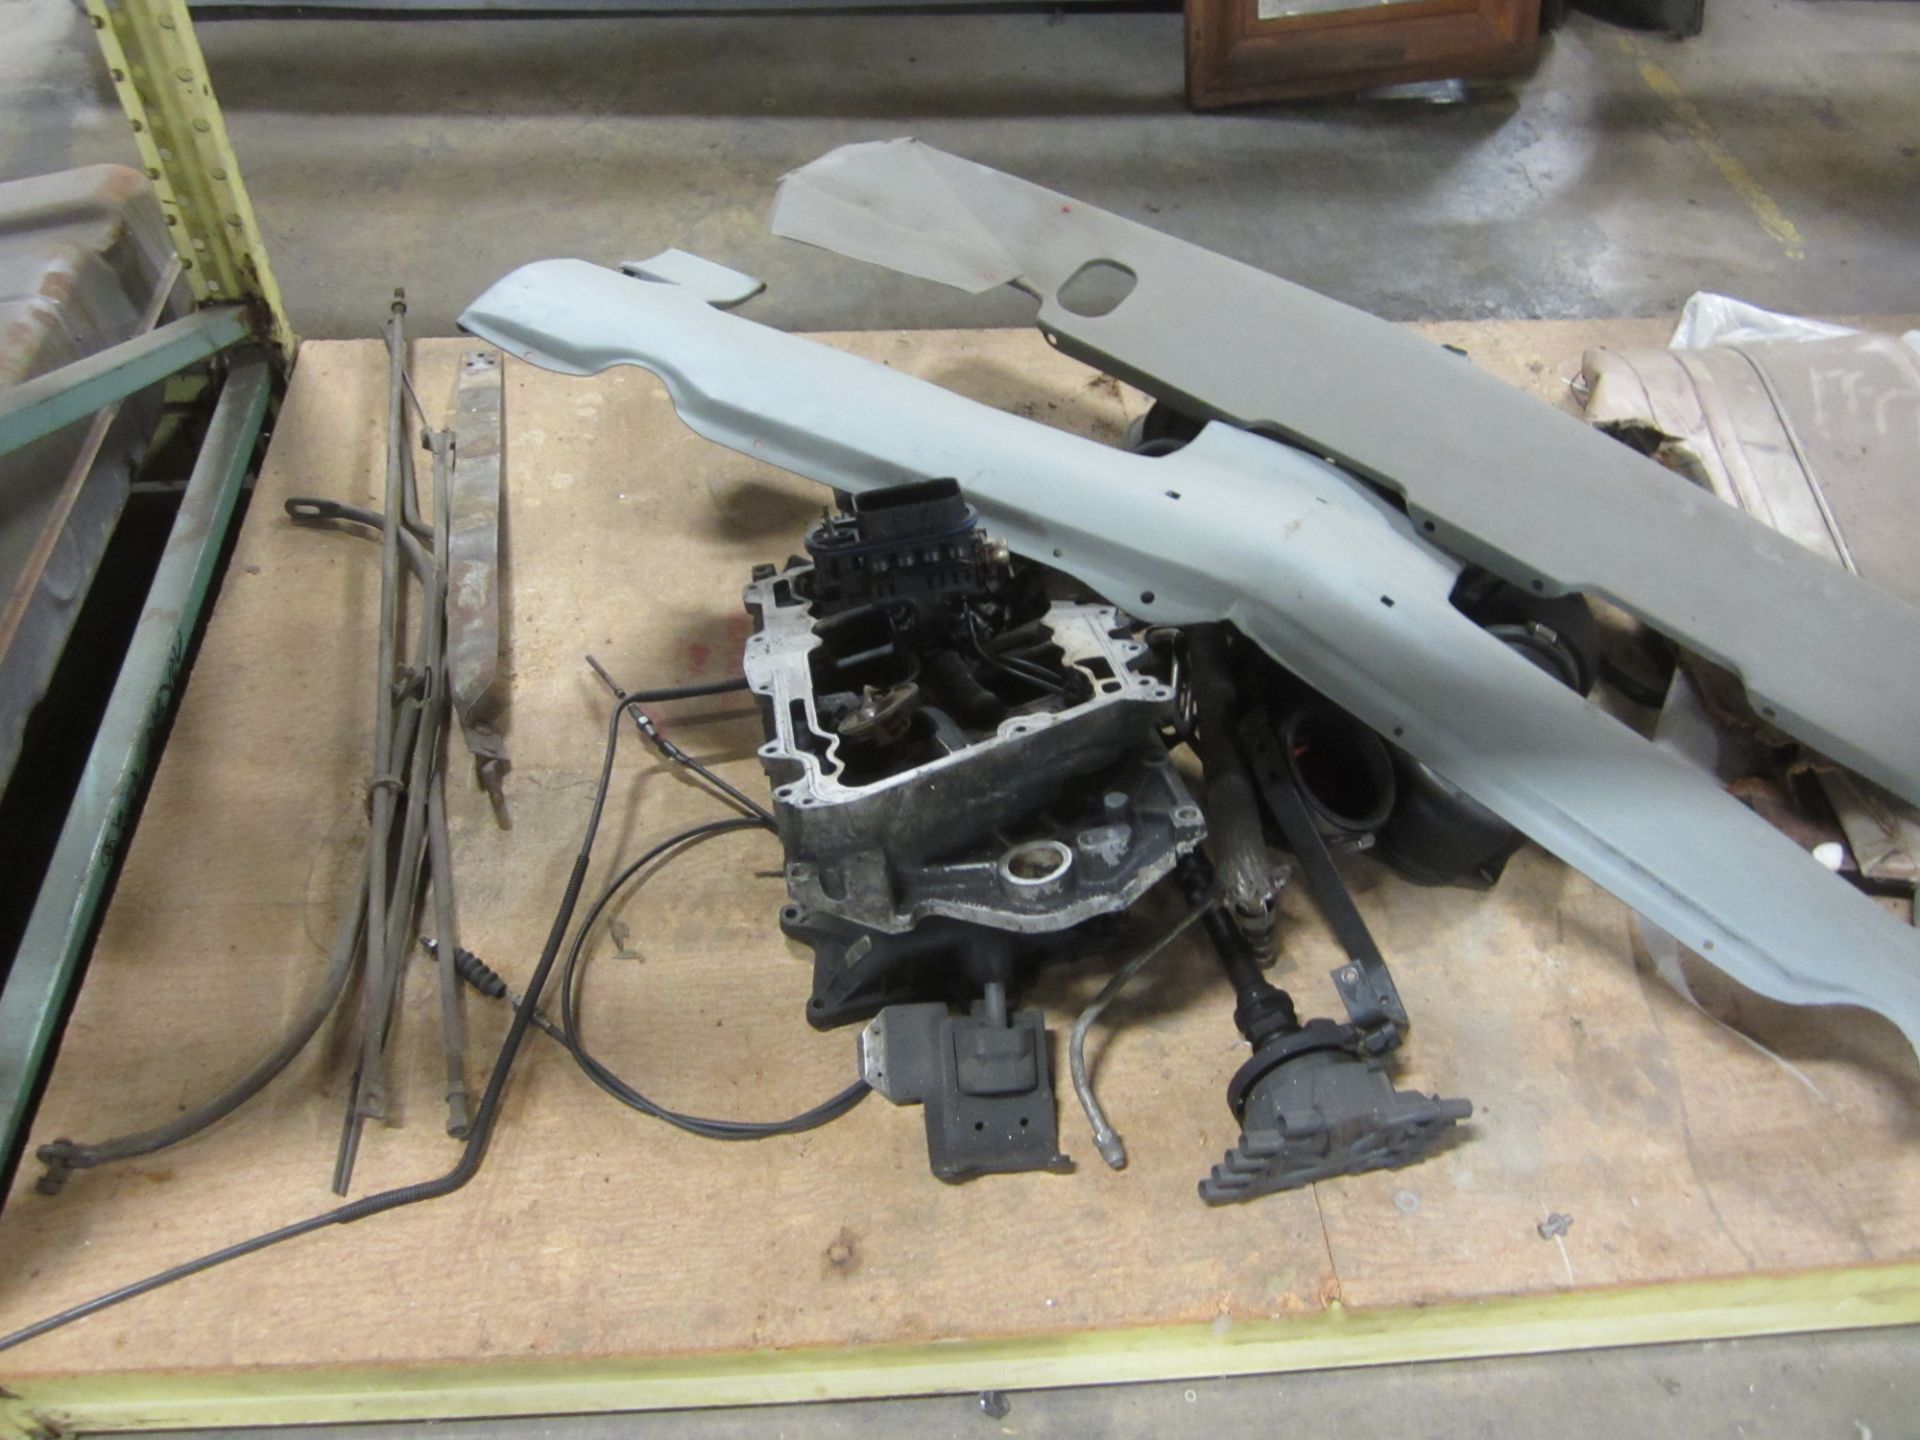 Miscellaneous Seat Trim, Floor Board Panels, and Miscellaneous Parts - Image 3 of 5